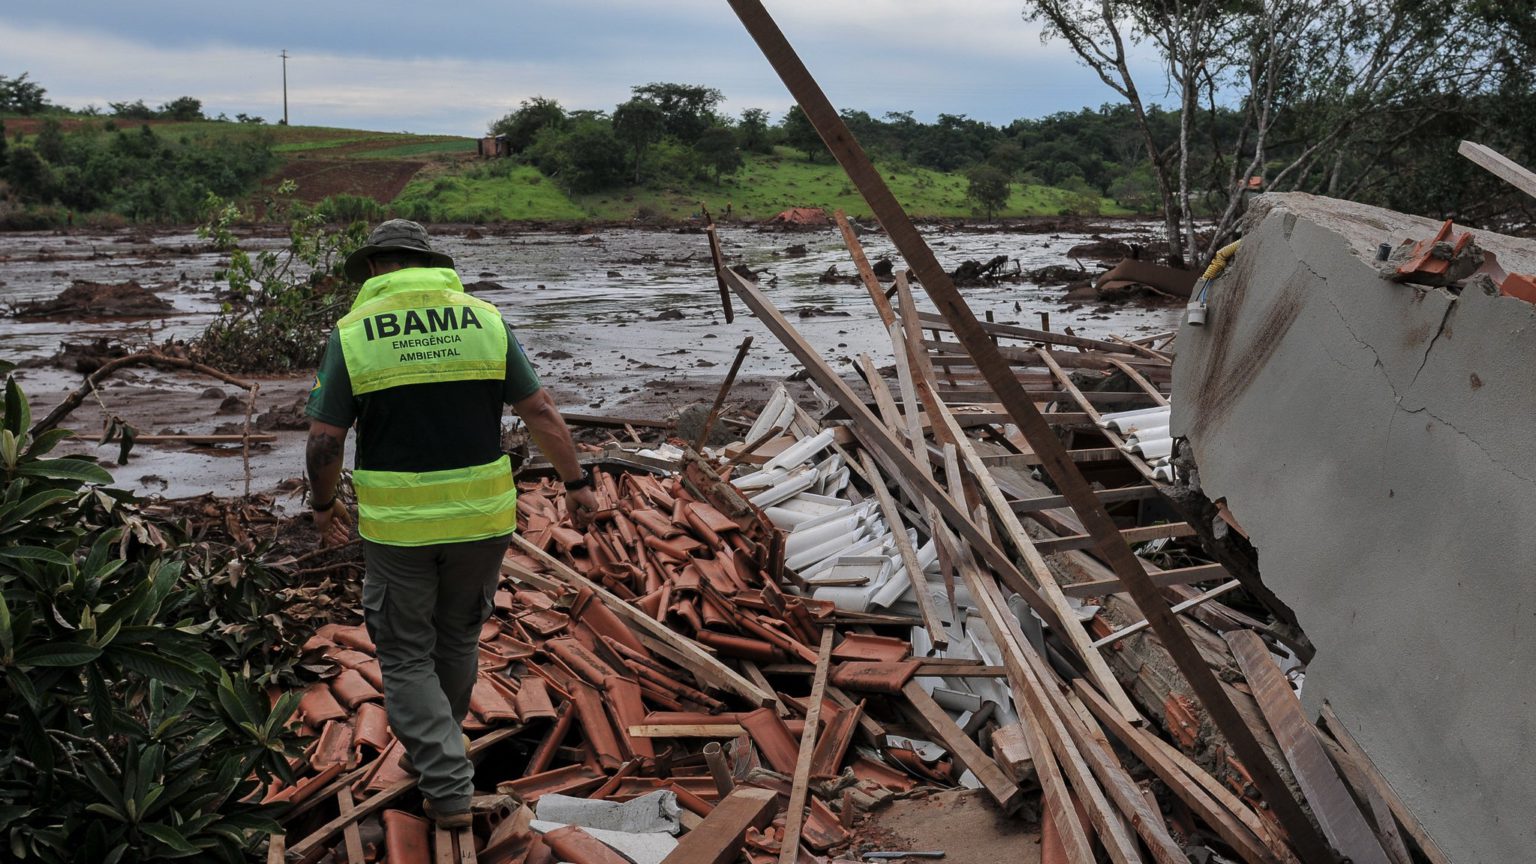 Vale ordered to pay $26 million to families of Brumadinho victims